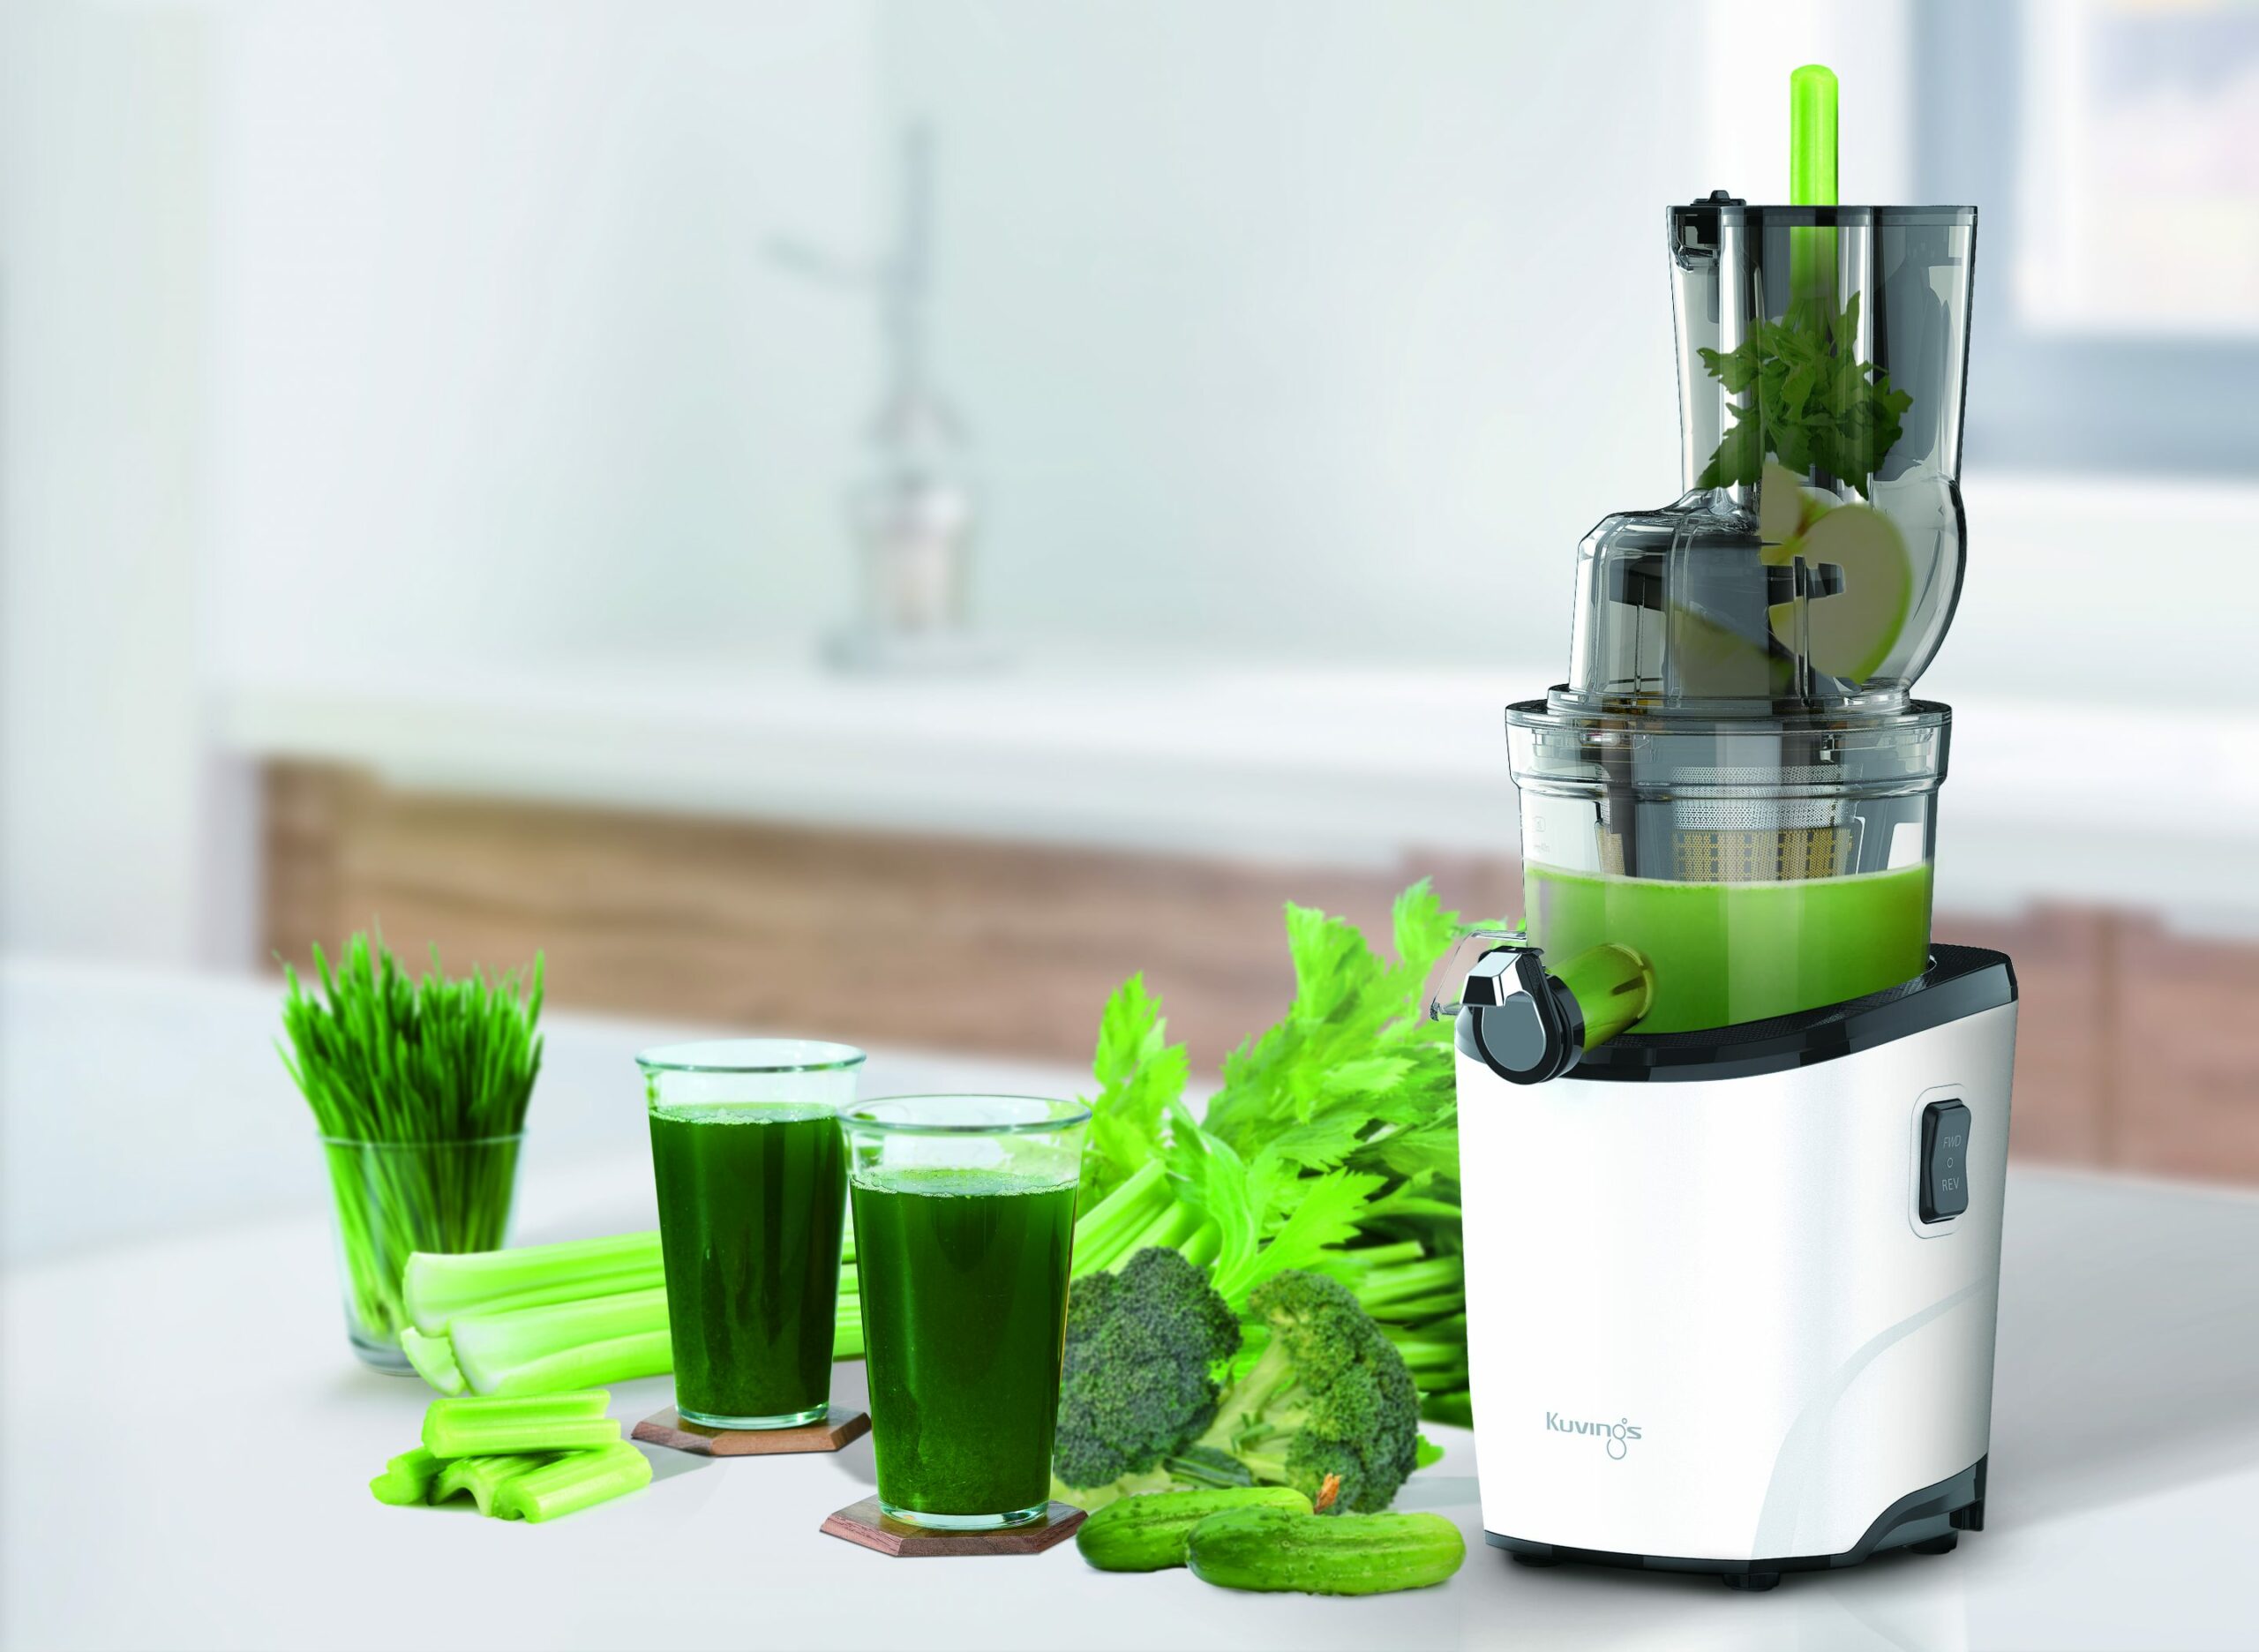 Kuvings impresses with new REVO 830 juicer